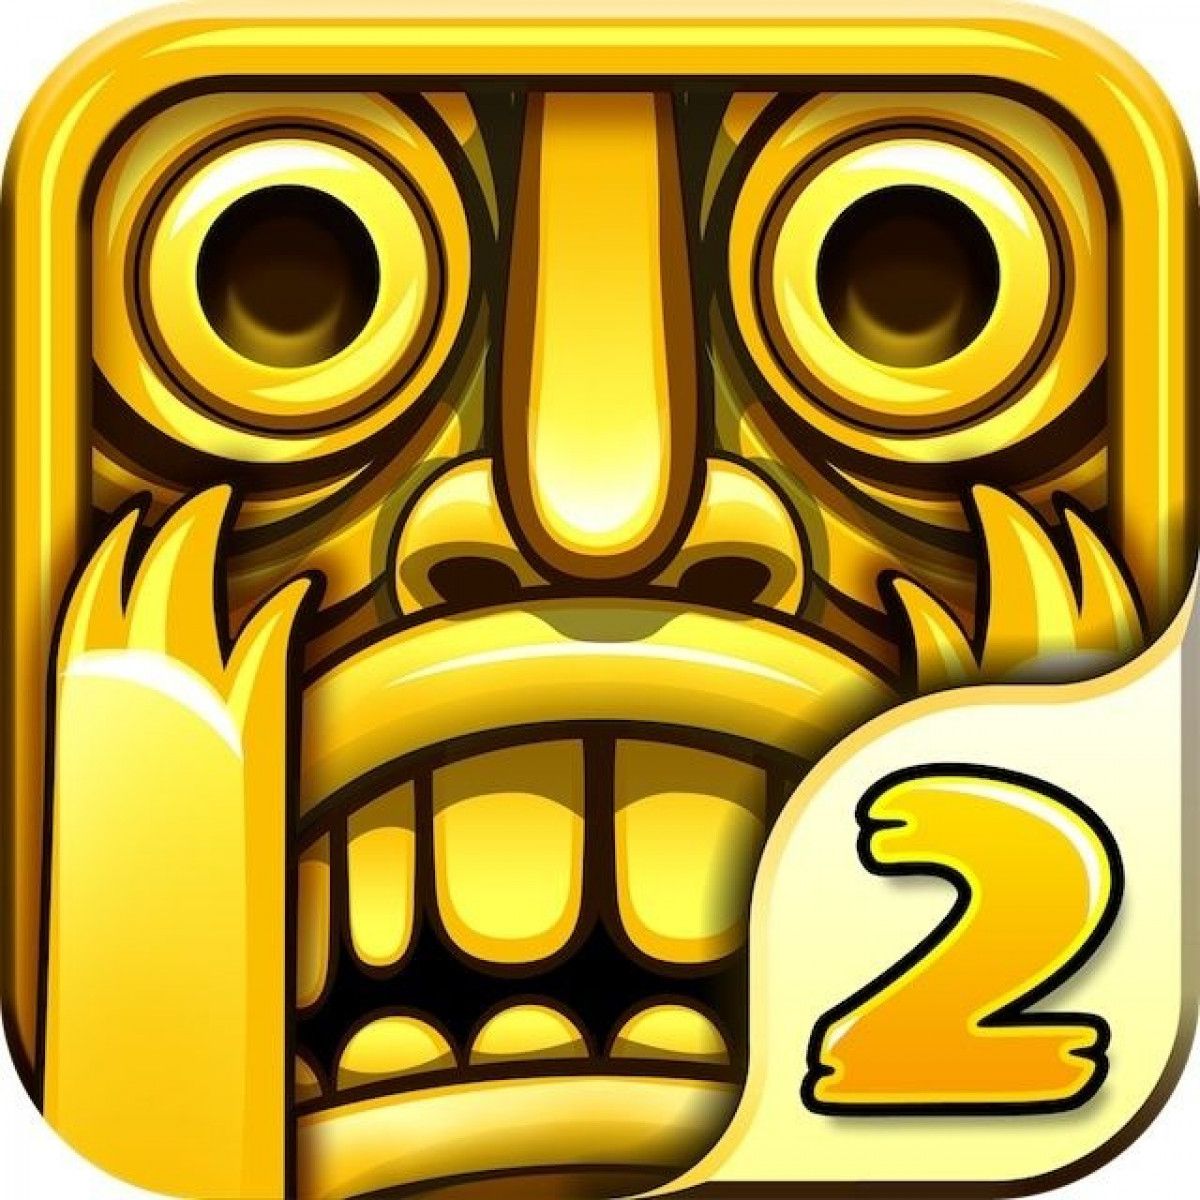 Temple Run 2 Review It A Worthy Successor Or Will The Curse